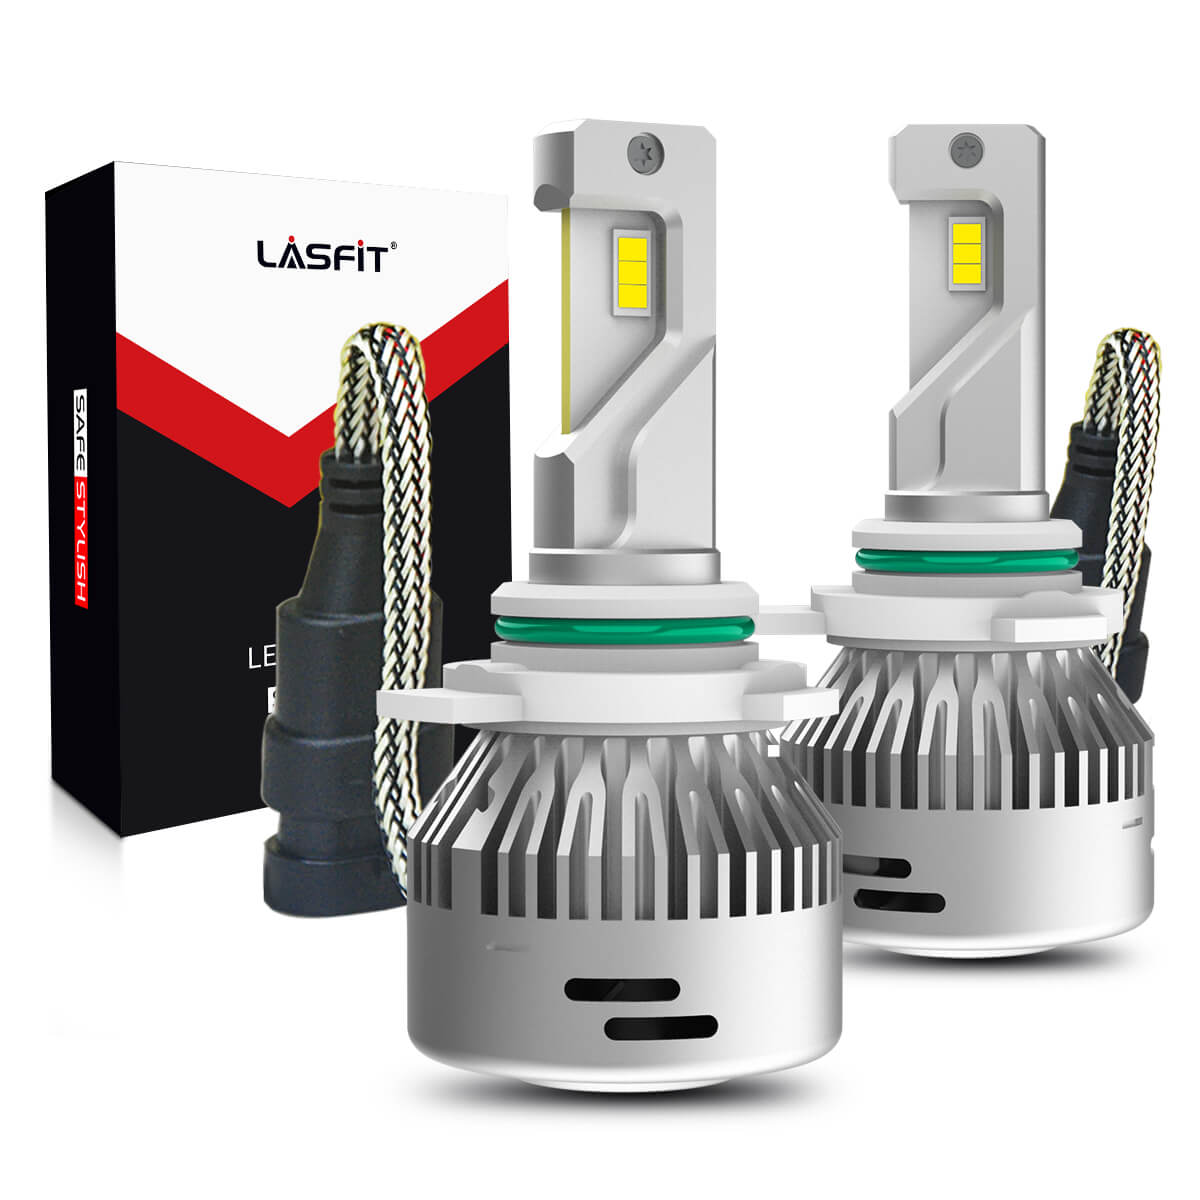 Lamps LED HB4 low beam and high beam - SC Styling